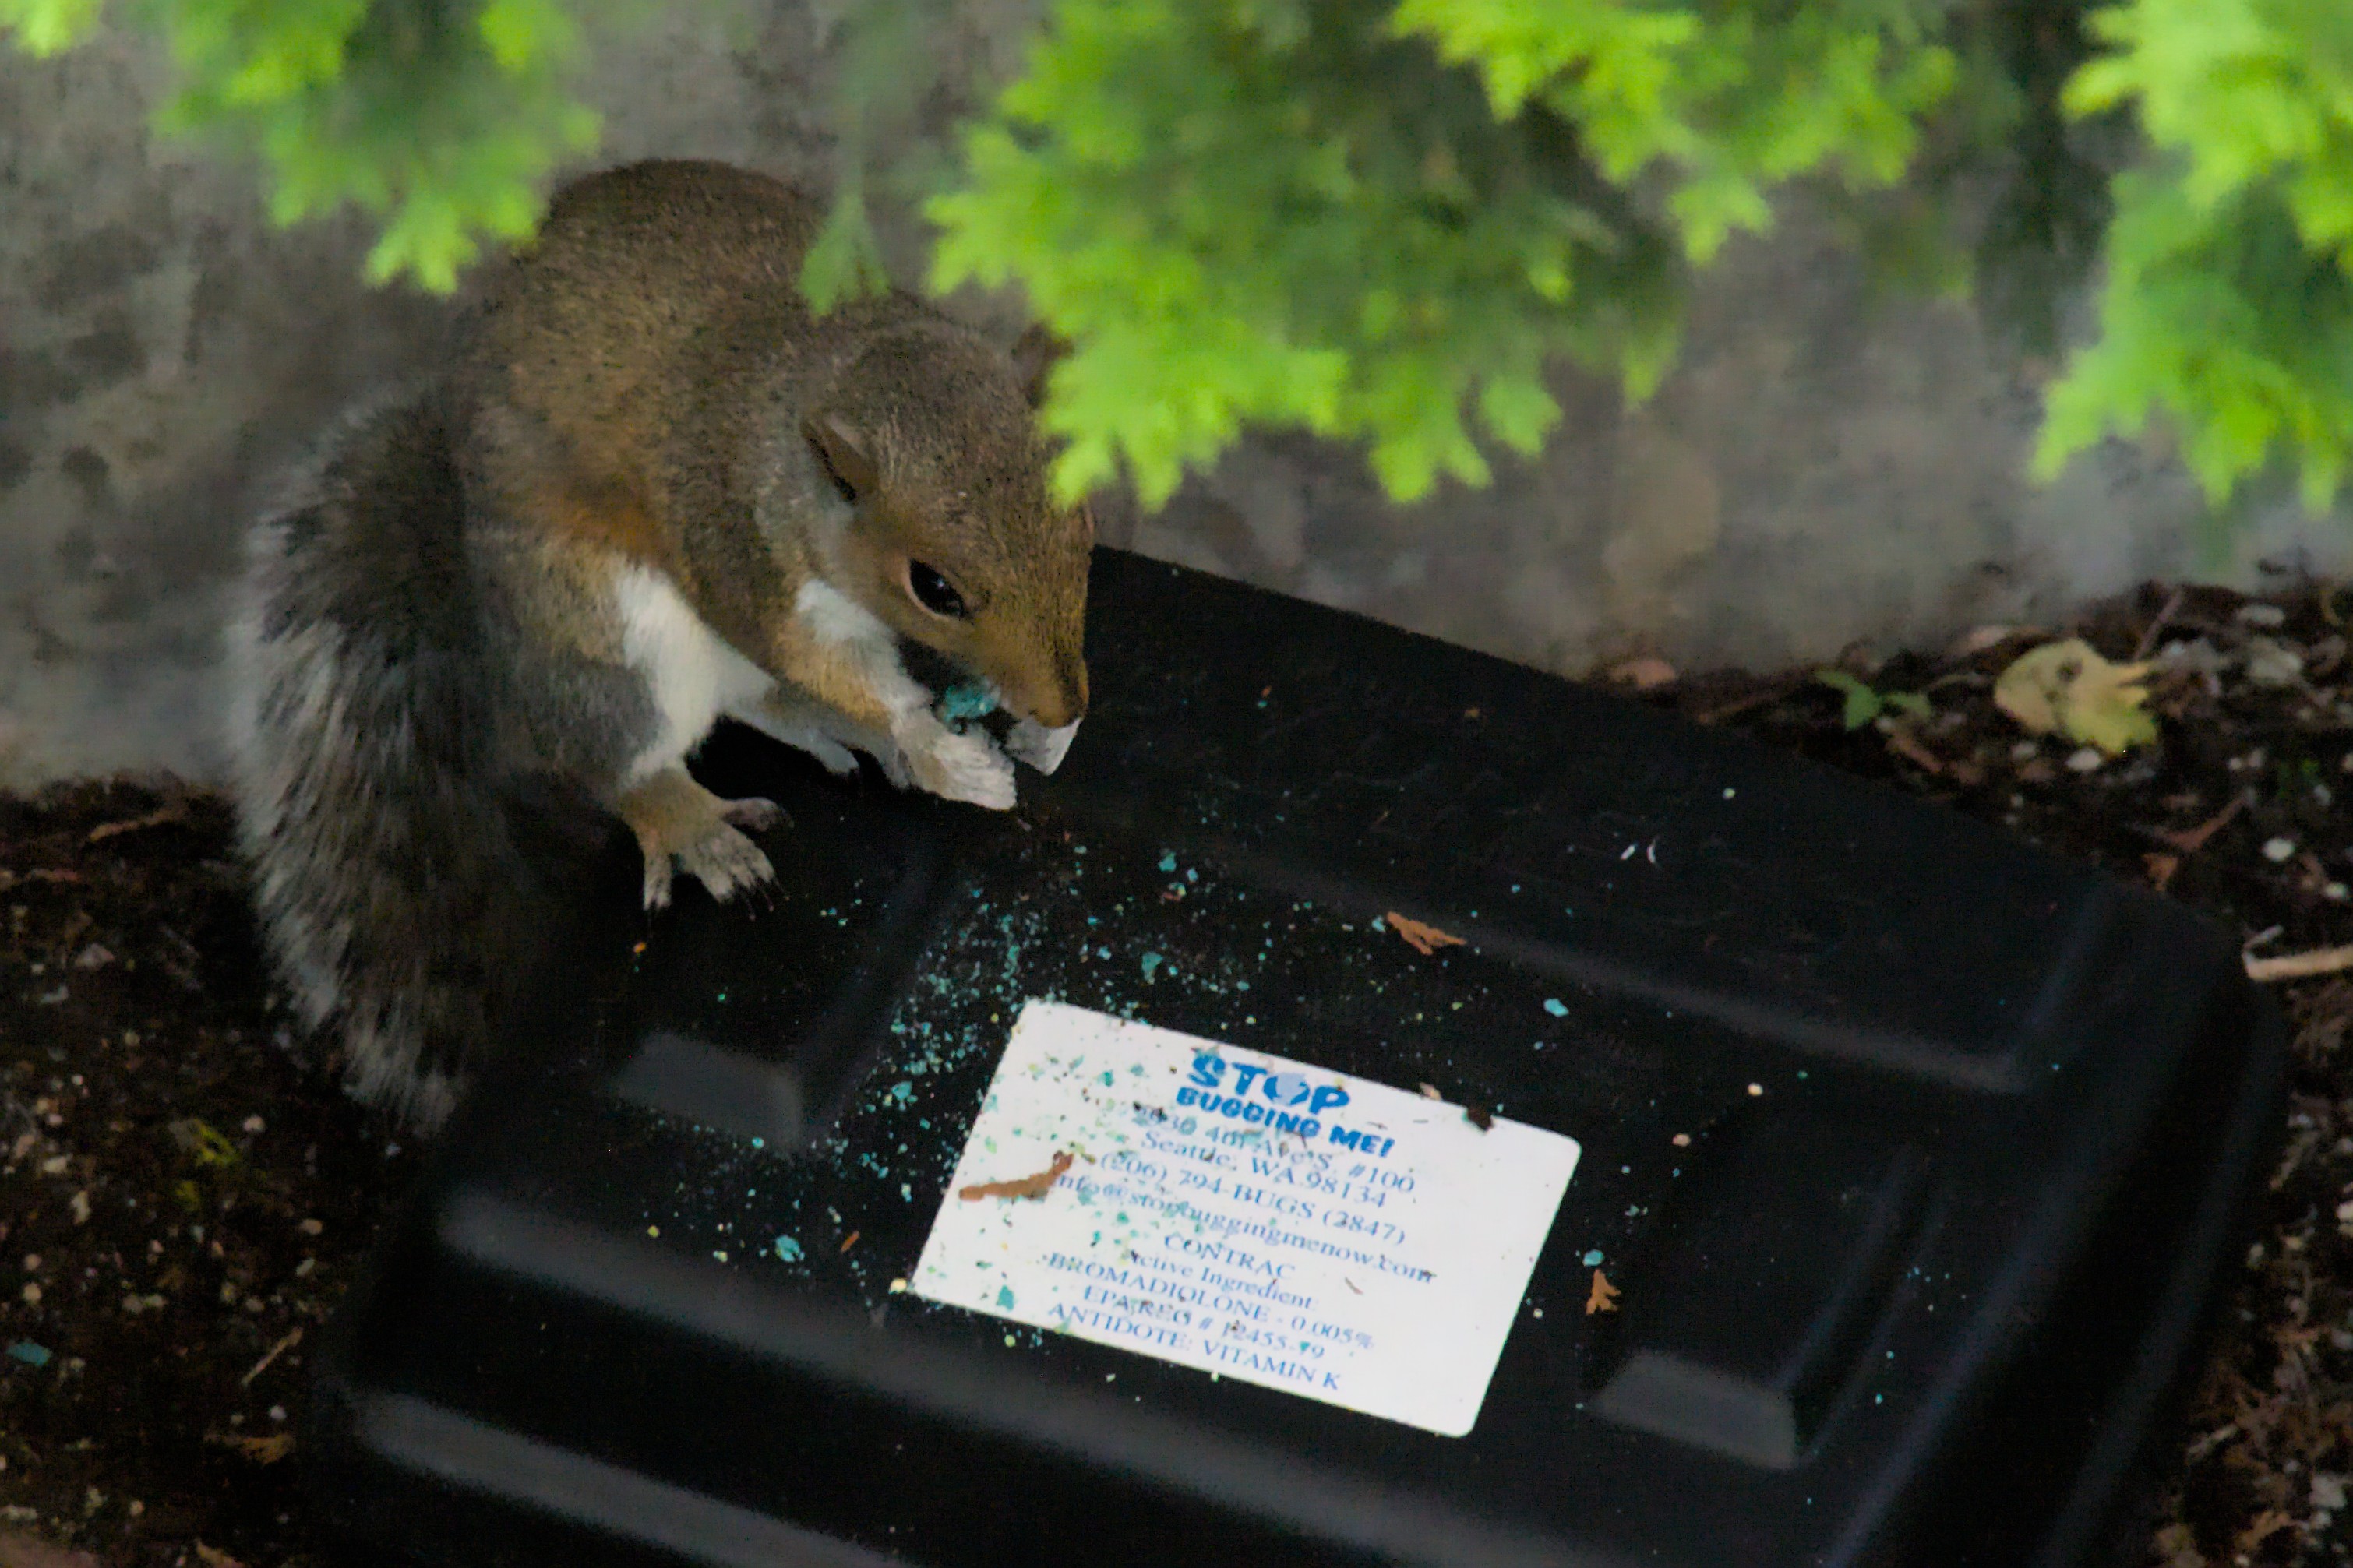 https://upload.wikimedia.org/wikipedia/commons/5/59/Tree_squirrel_eating_bromadiolone_tablets_from_a_rodent_bait_station.jpg